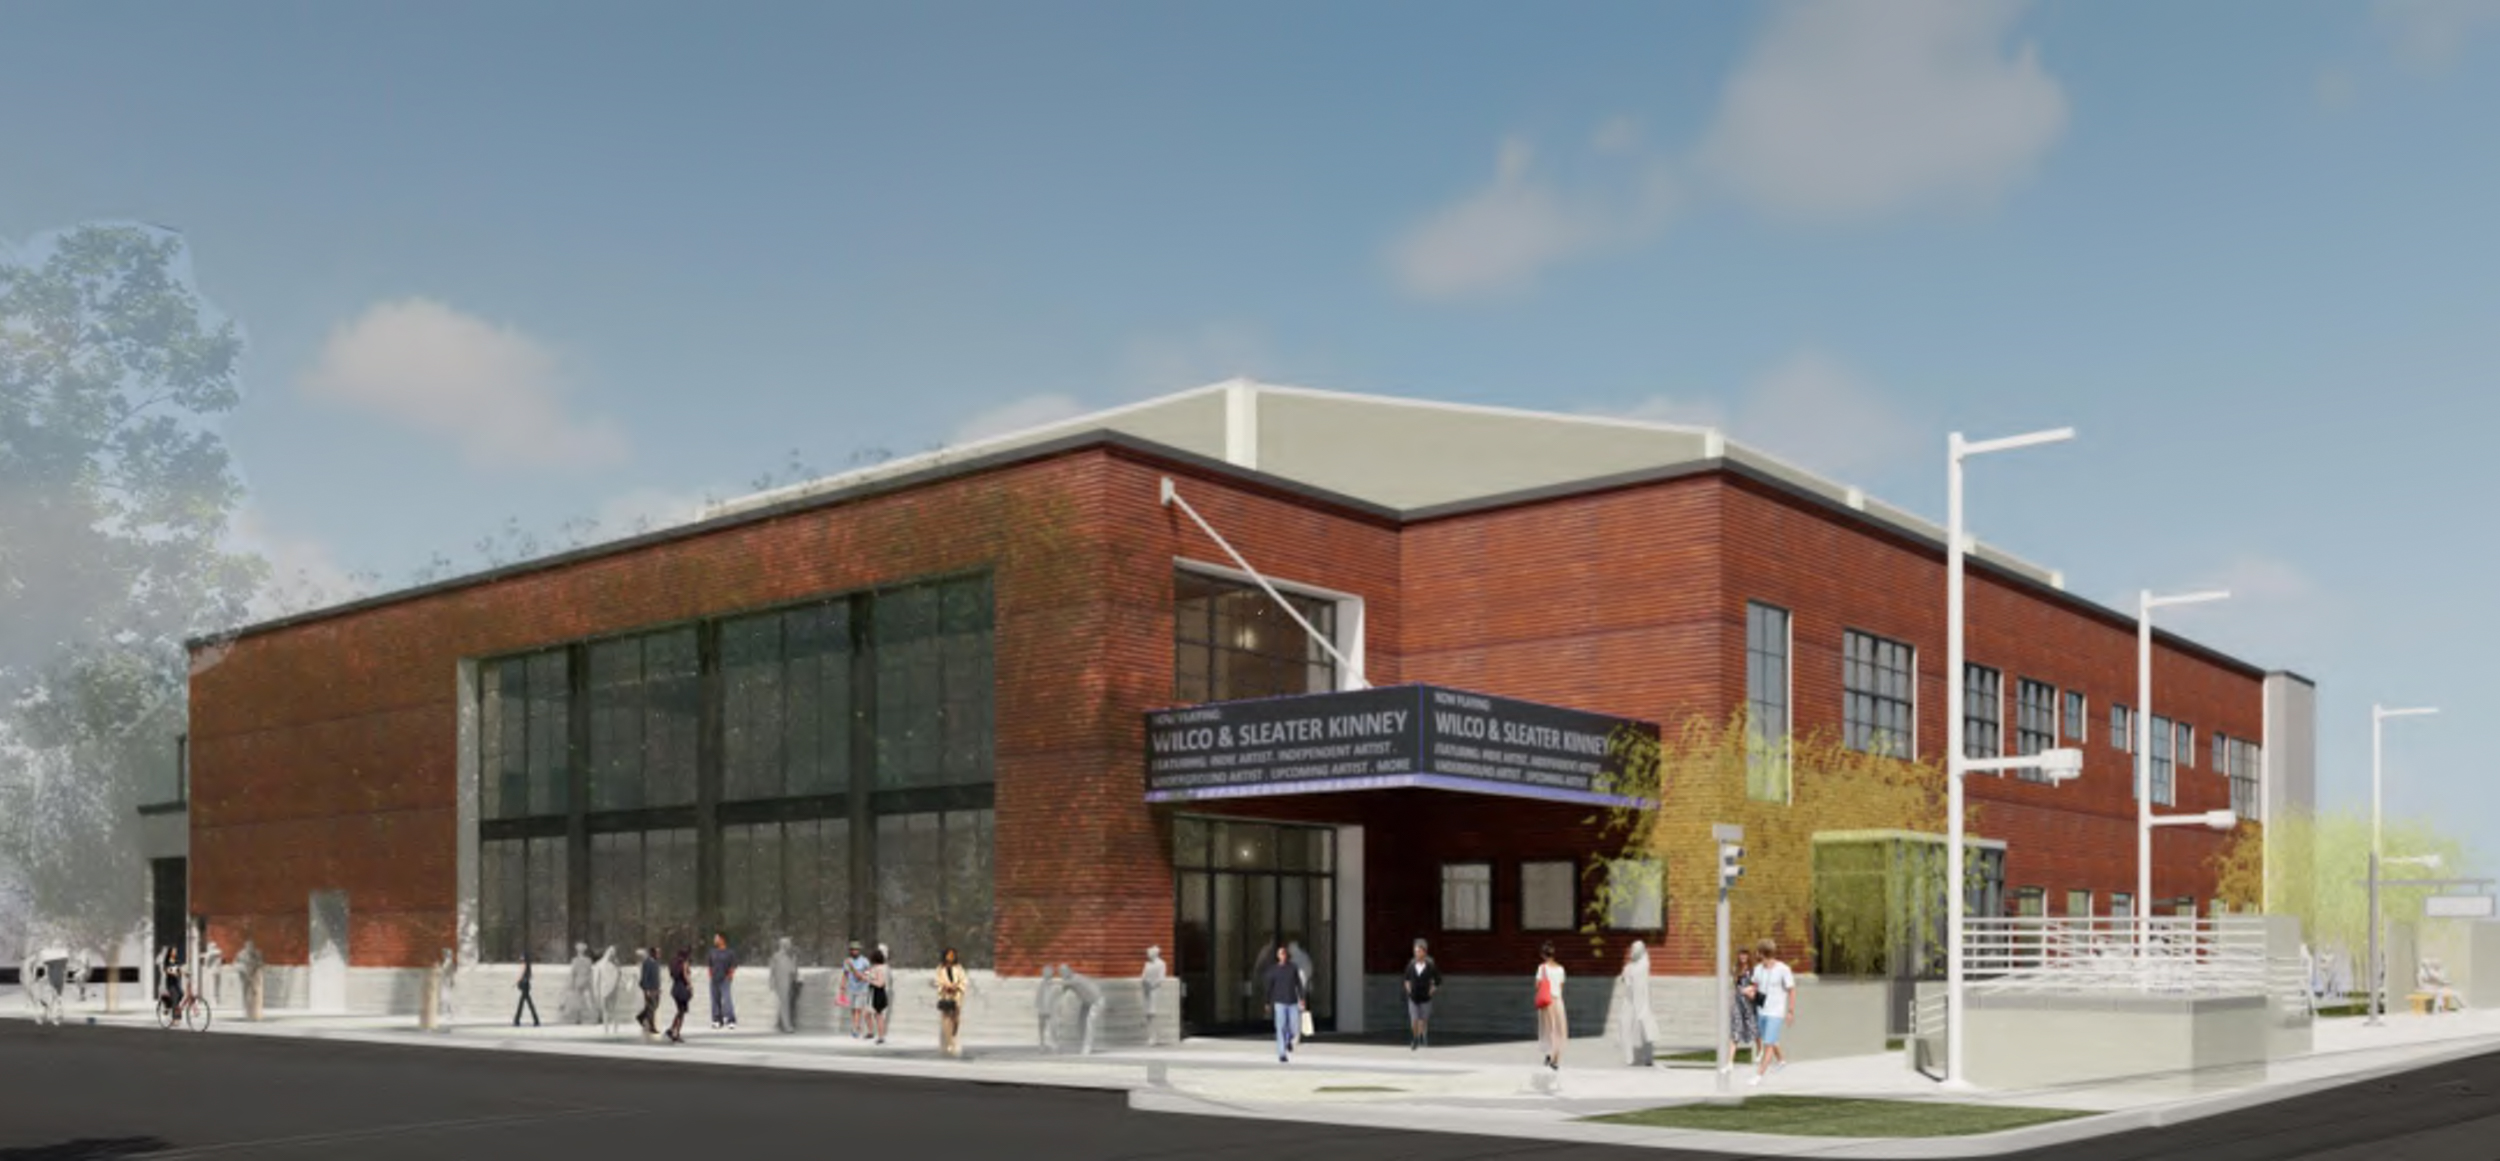 24R Theater at 1800 24th Street, rendering via CAW and Ellis Architects